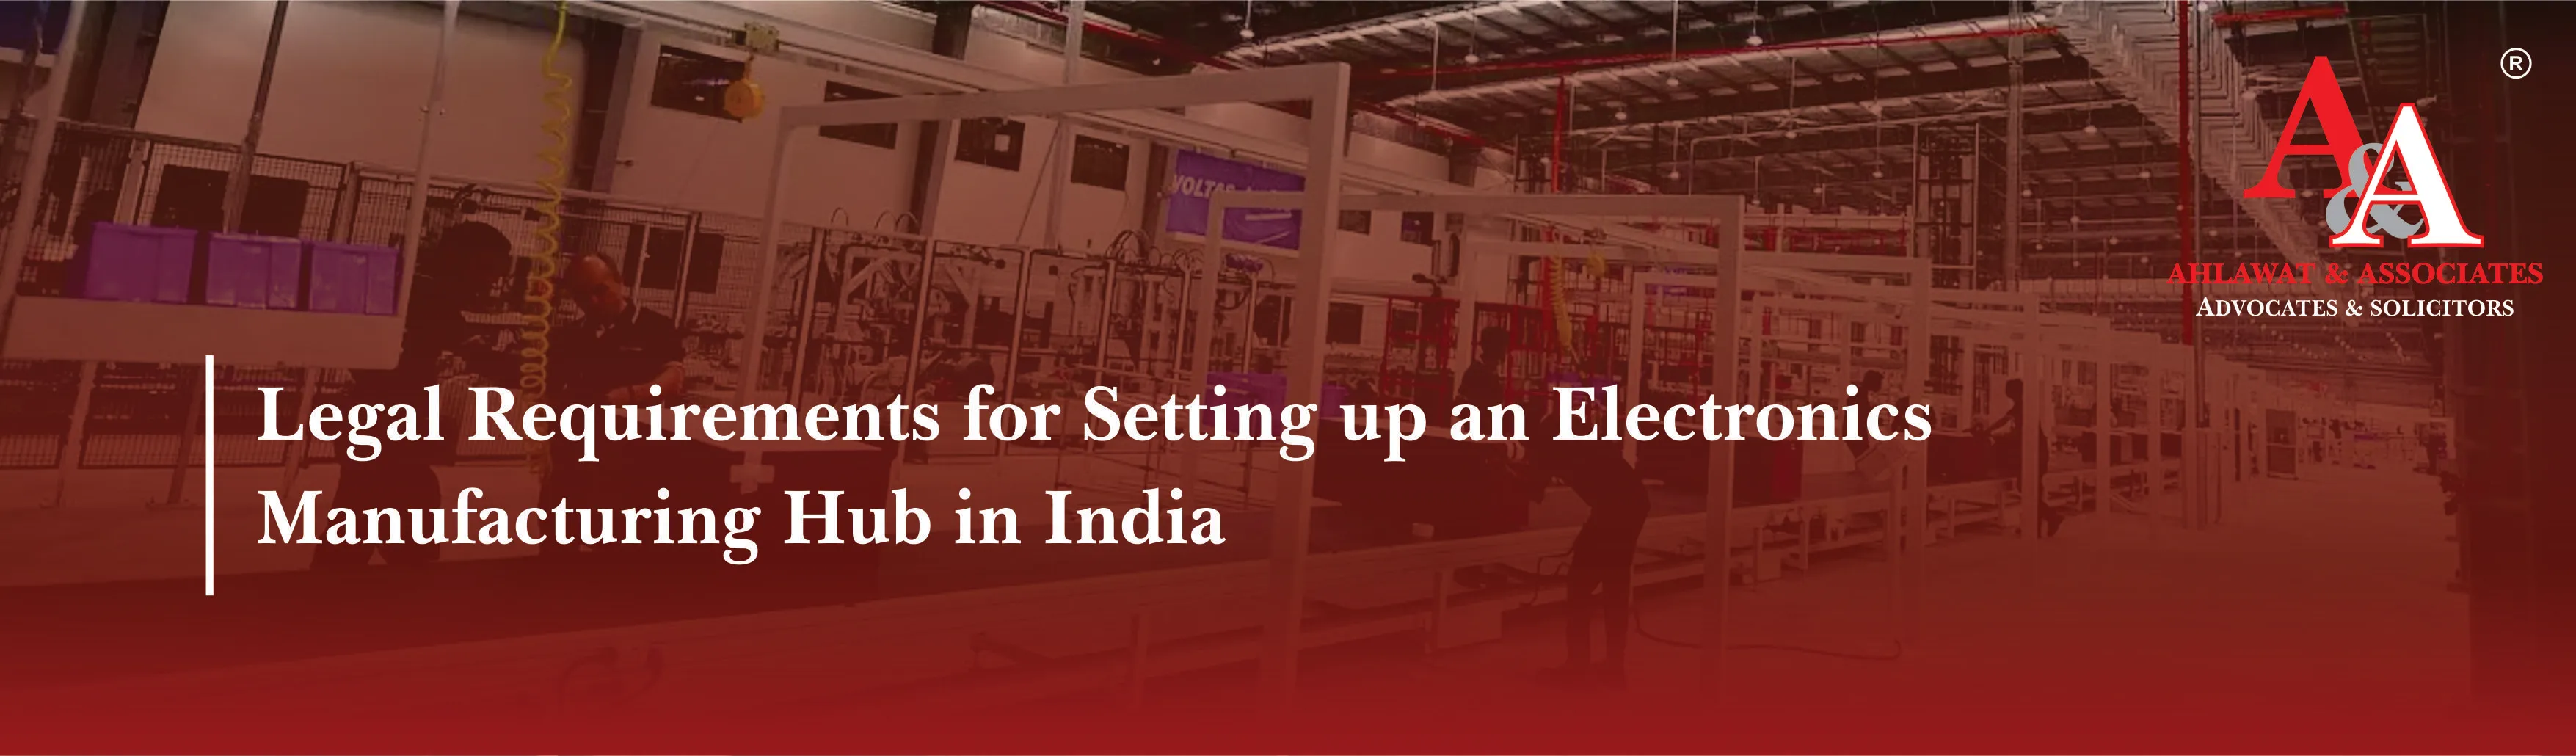 Legal Requirements for Setting up an Electronics Manufacturing Hub in India